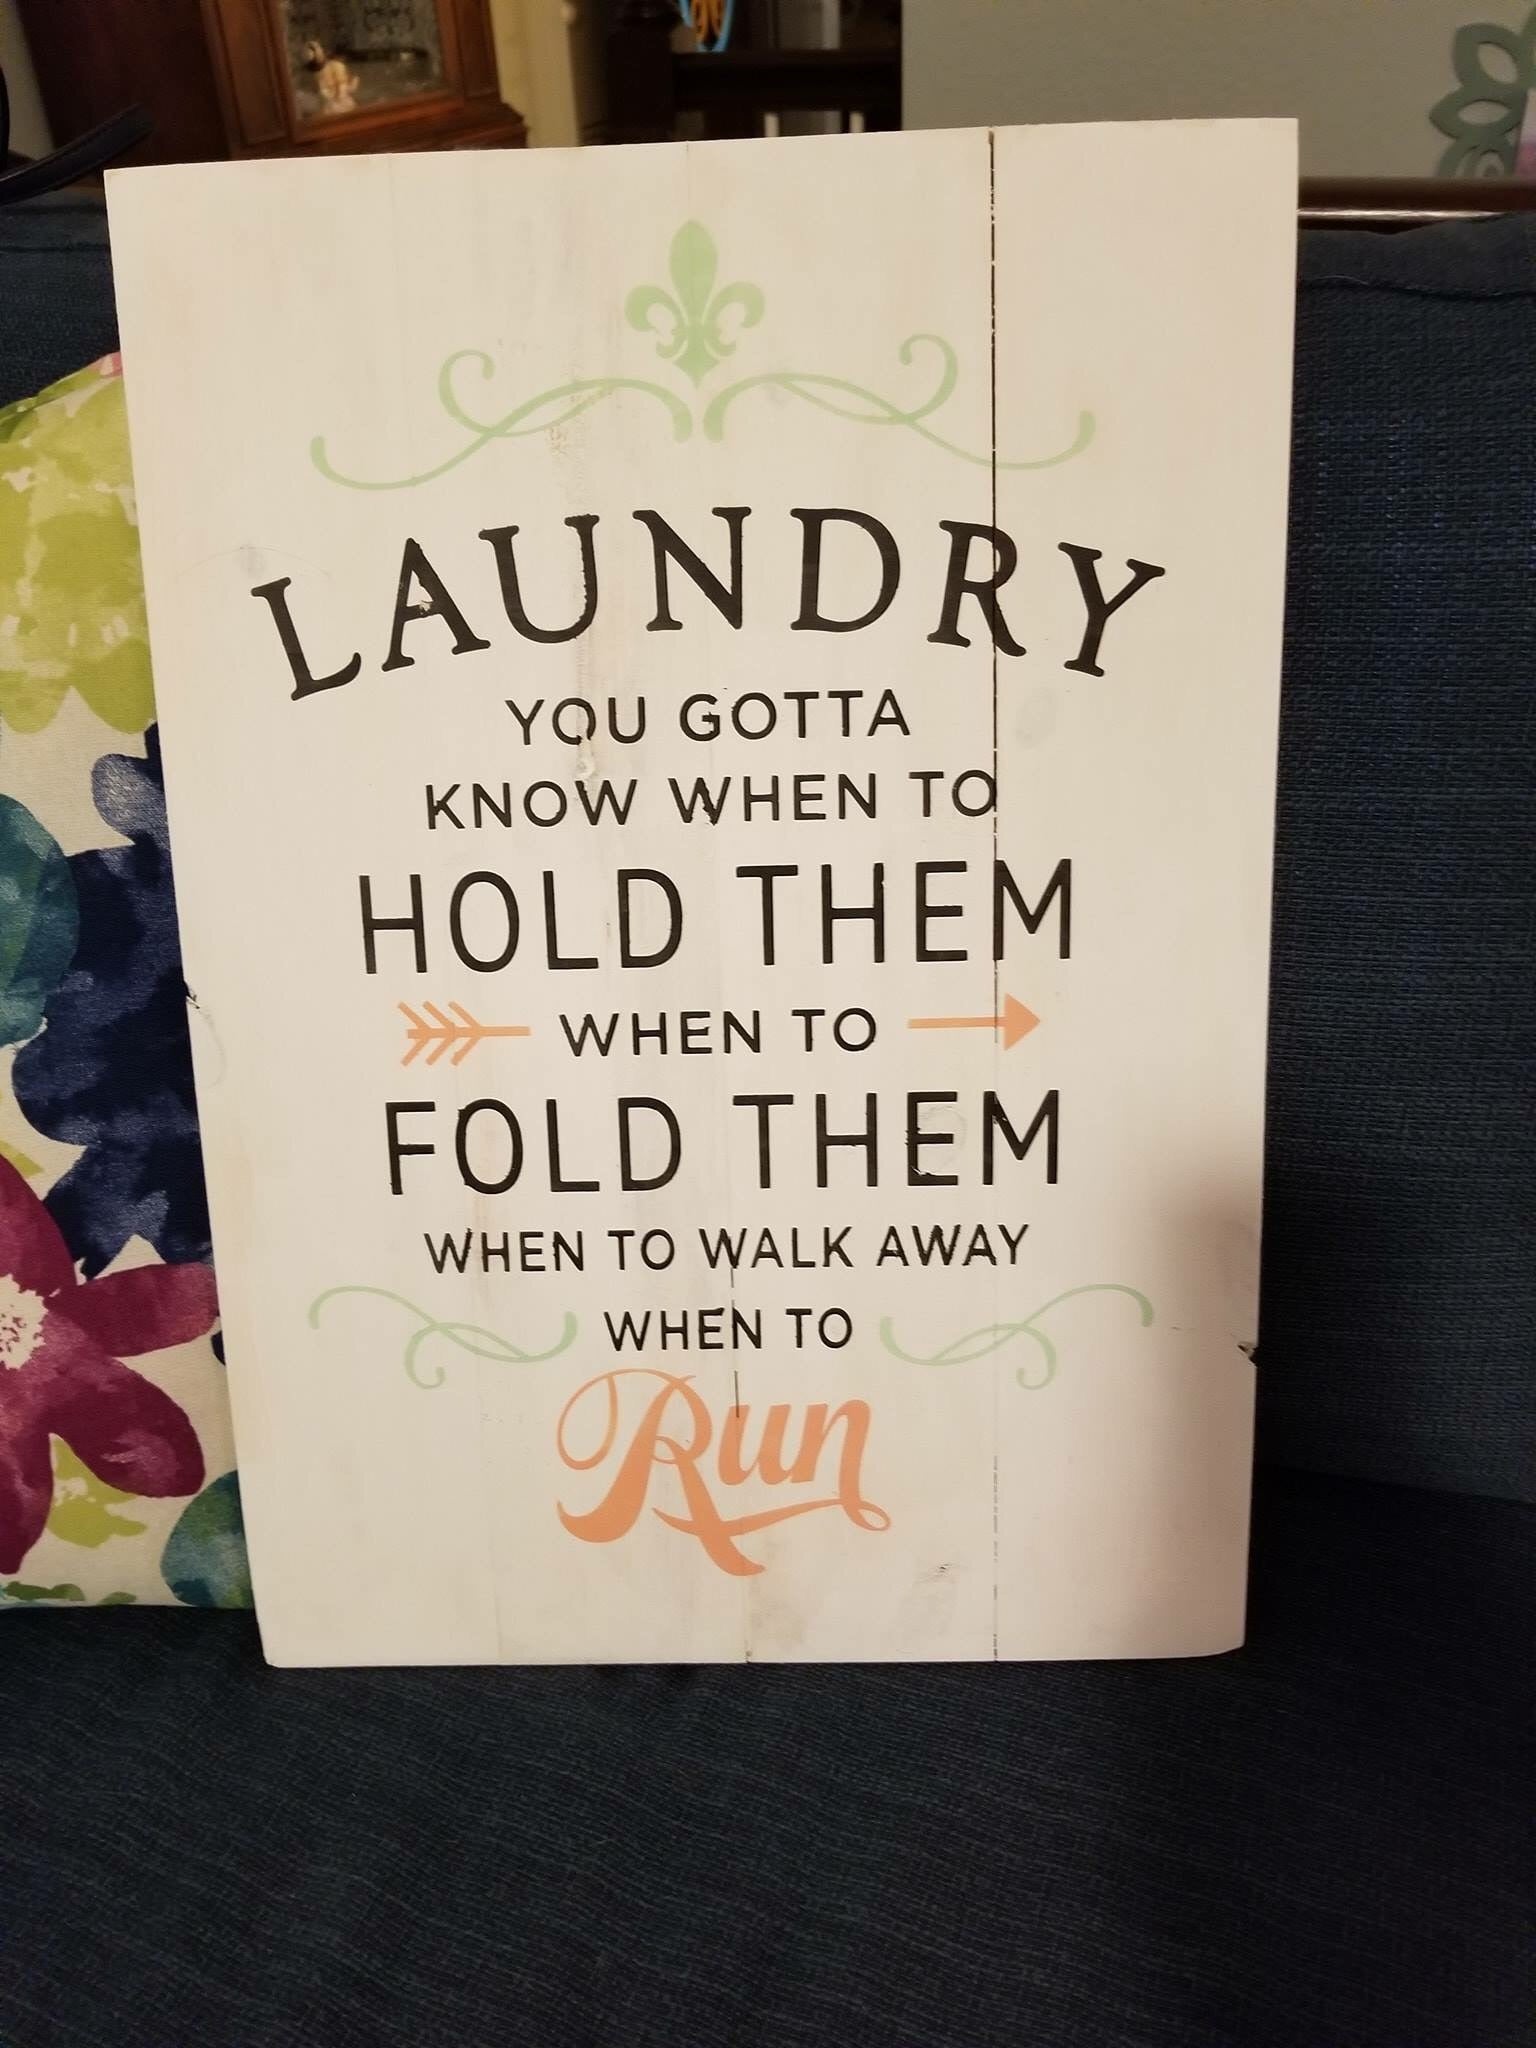 Laundry you gotta know when to hold them